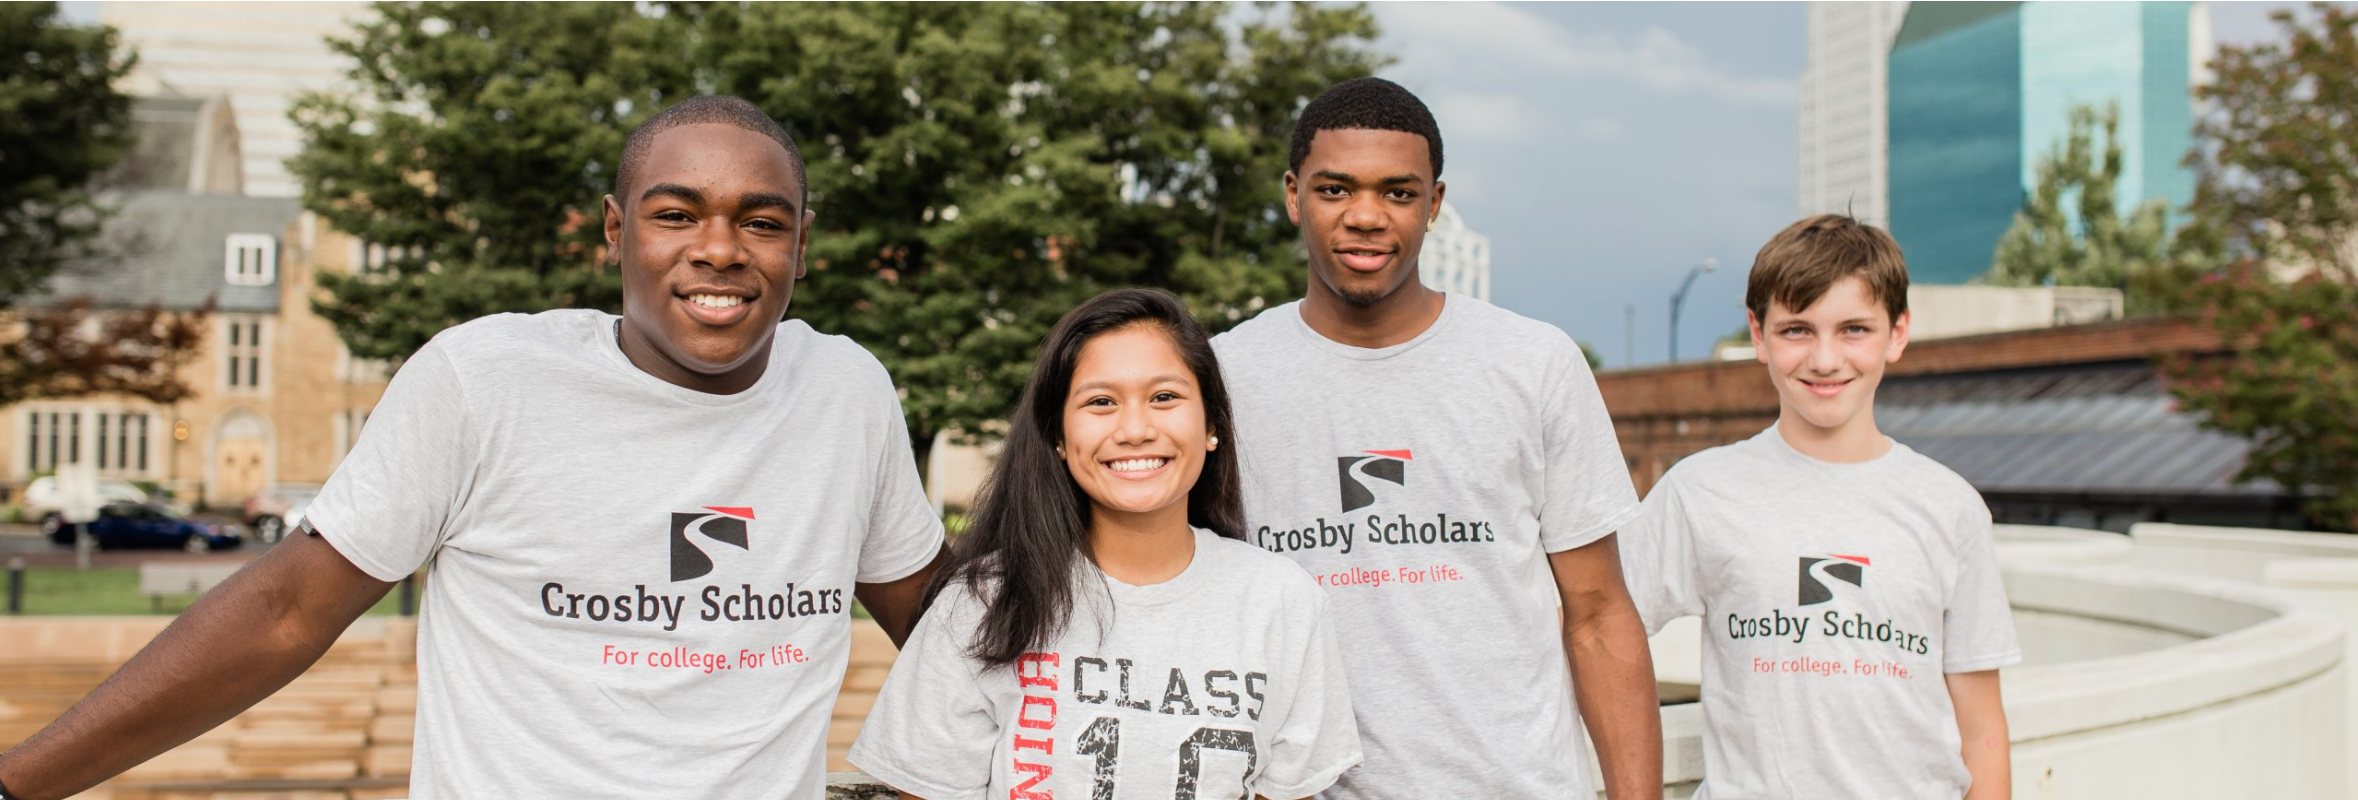 A group of 4 children and teens, smiling and wearing Crosby Scholars shirts.